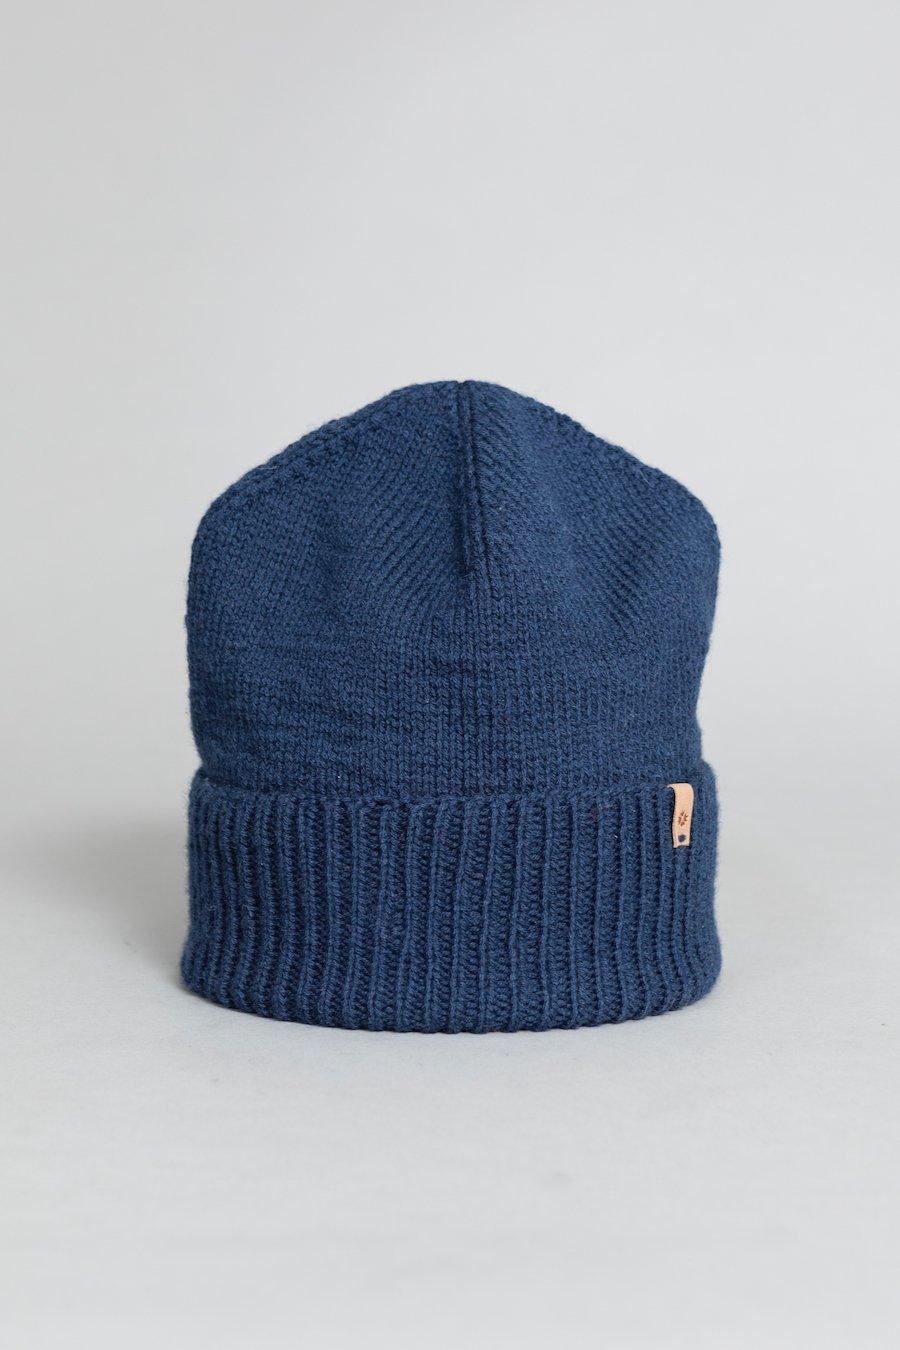 Merino Cuffed Hat - Ethical Trade Co